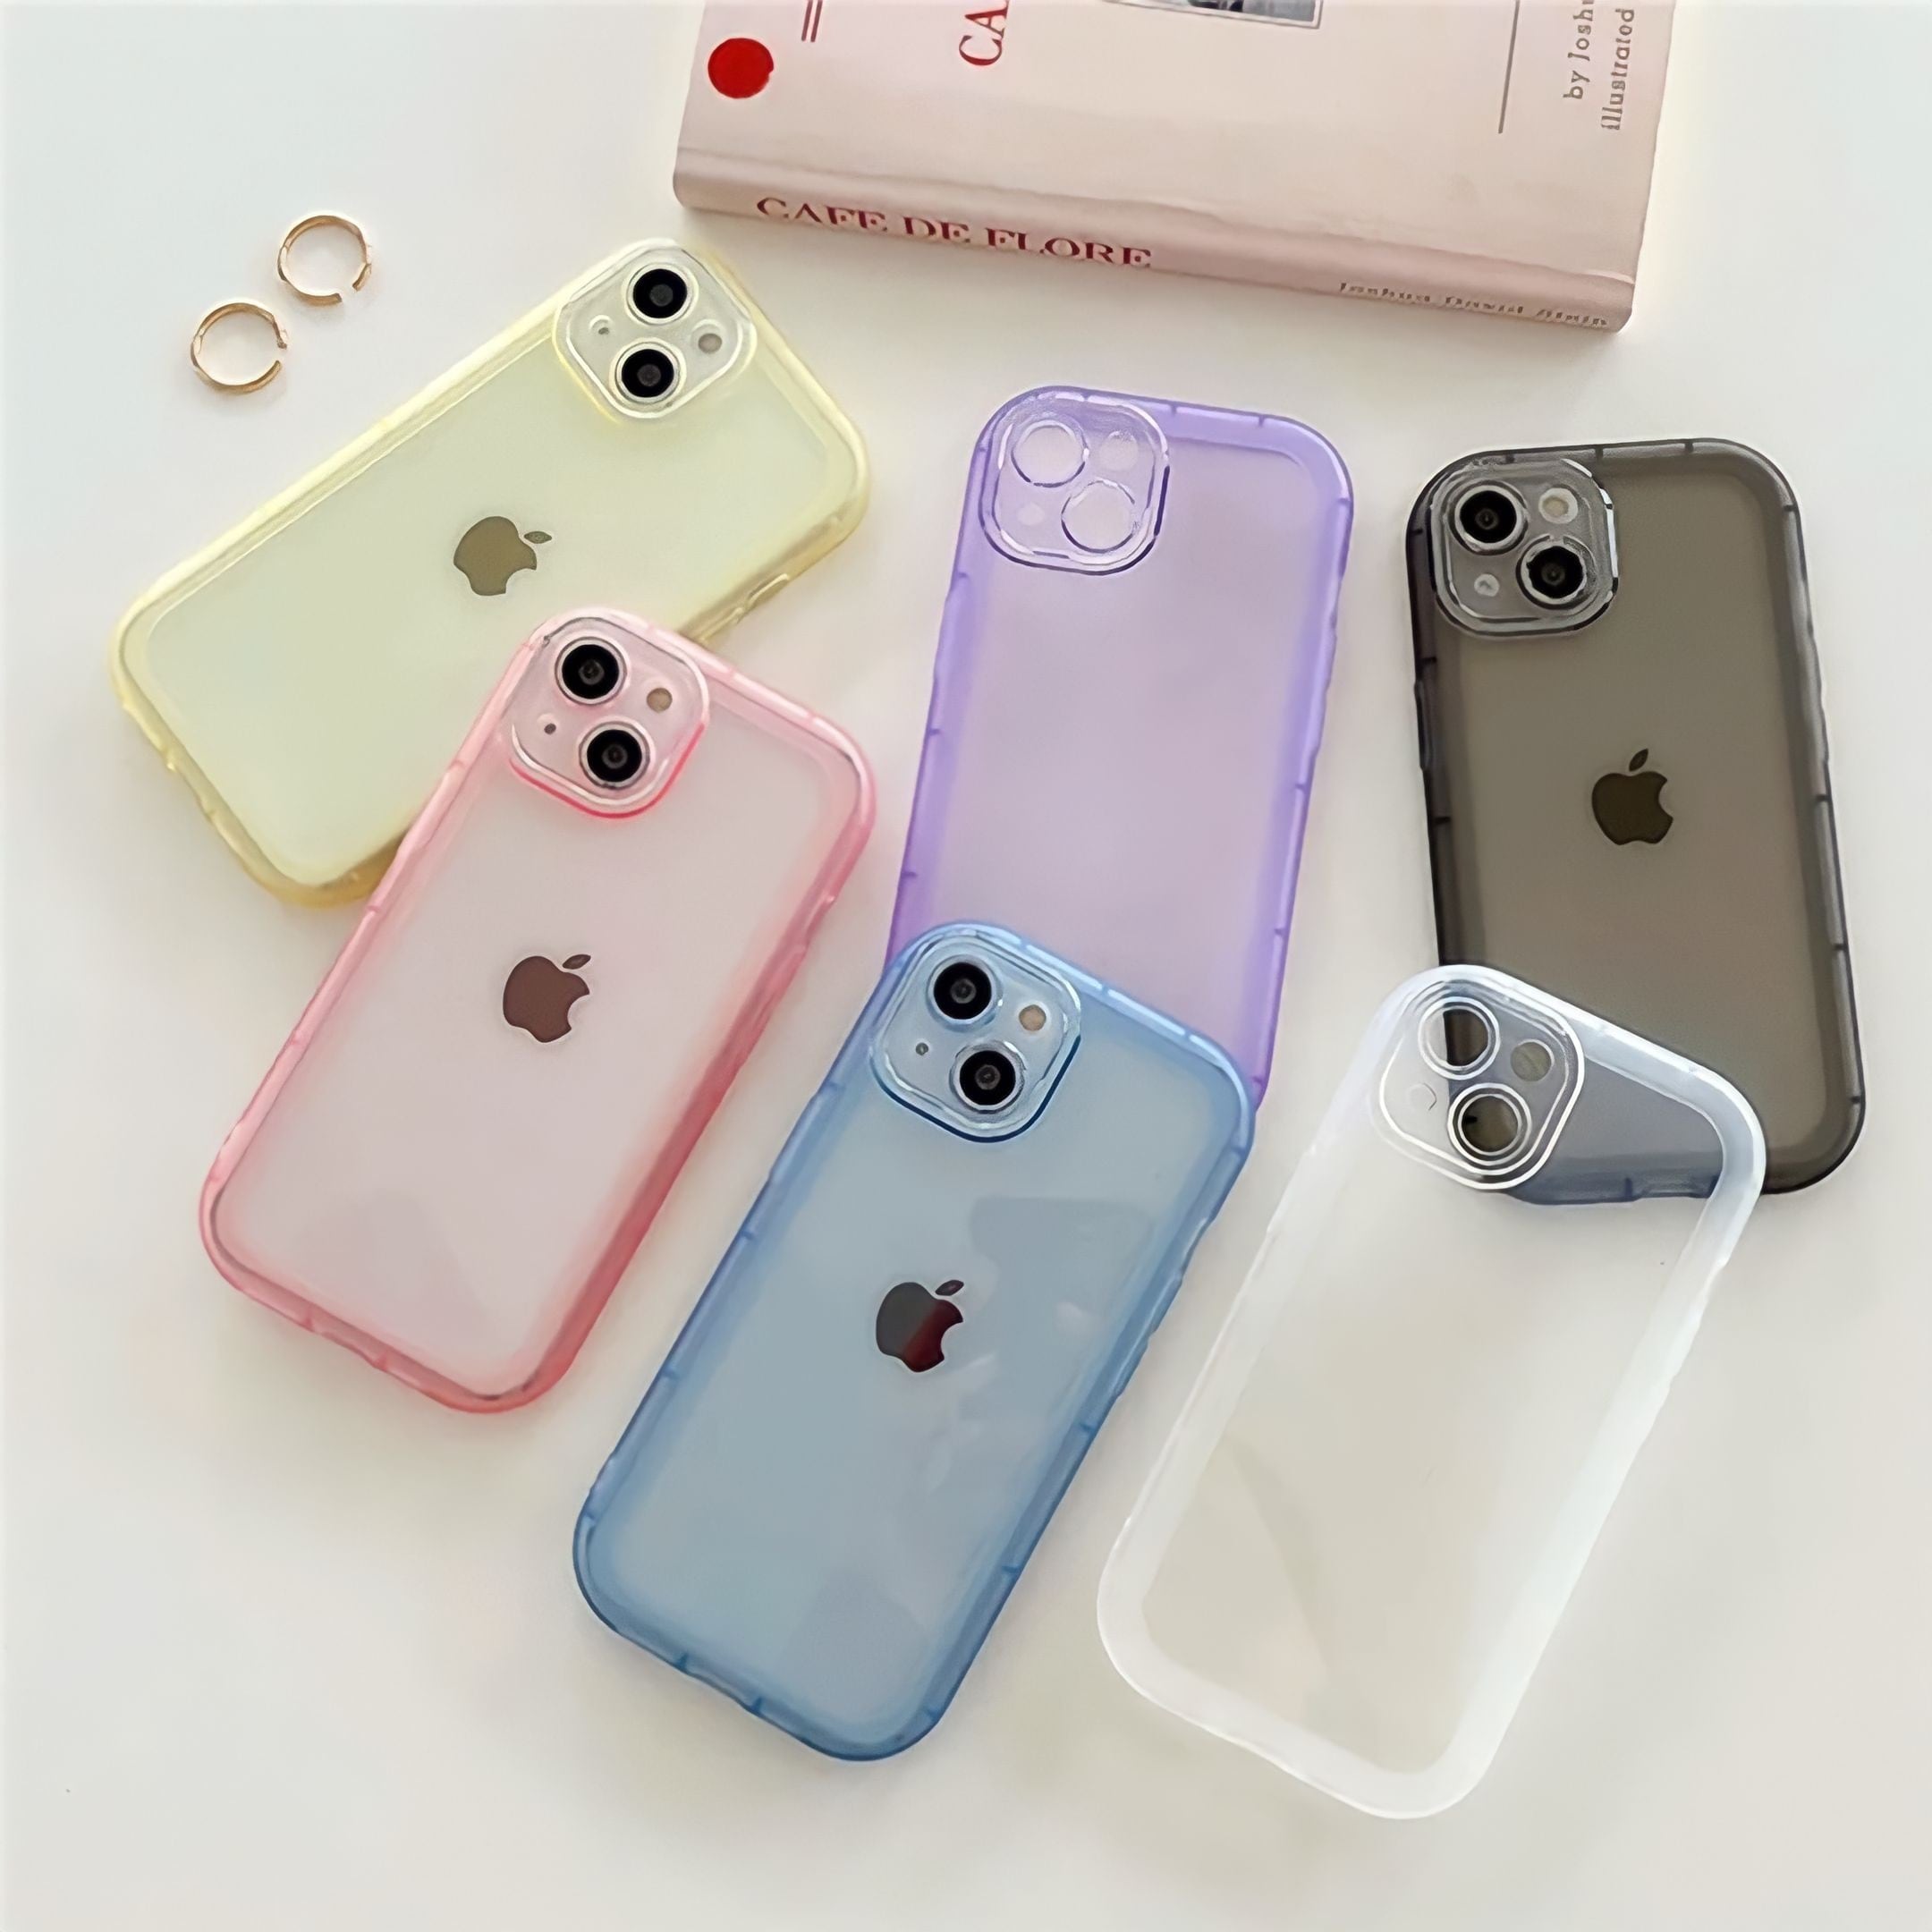 【A390】6ColorSimple Clear iPhonecase iPhoneケース あいふぉんけーす ミラーケース iPhone14ケース  iPhone12ケース iPhone13ケース 可愛い 韓国 | 2MU powered by BASE